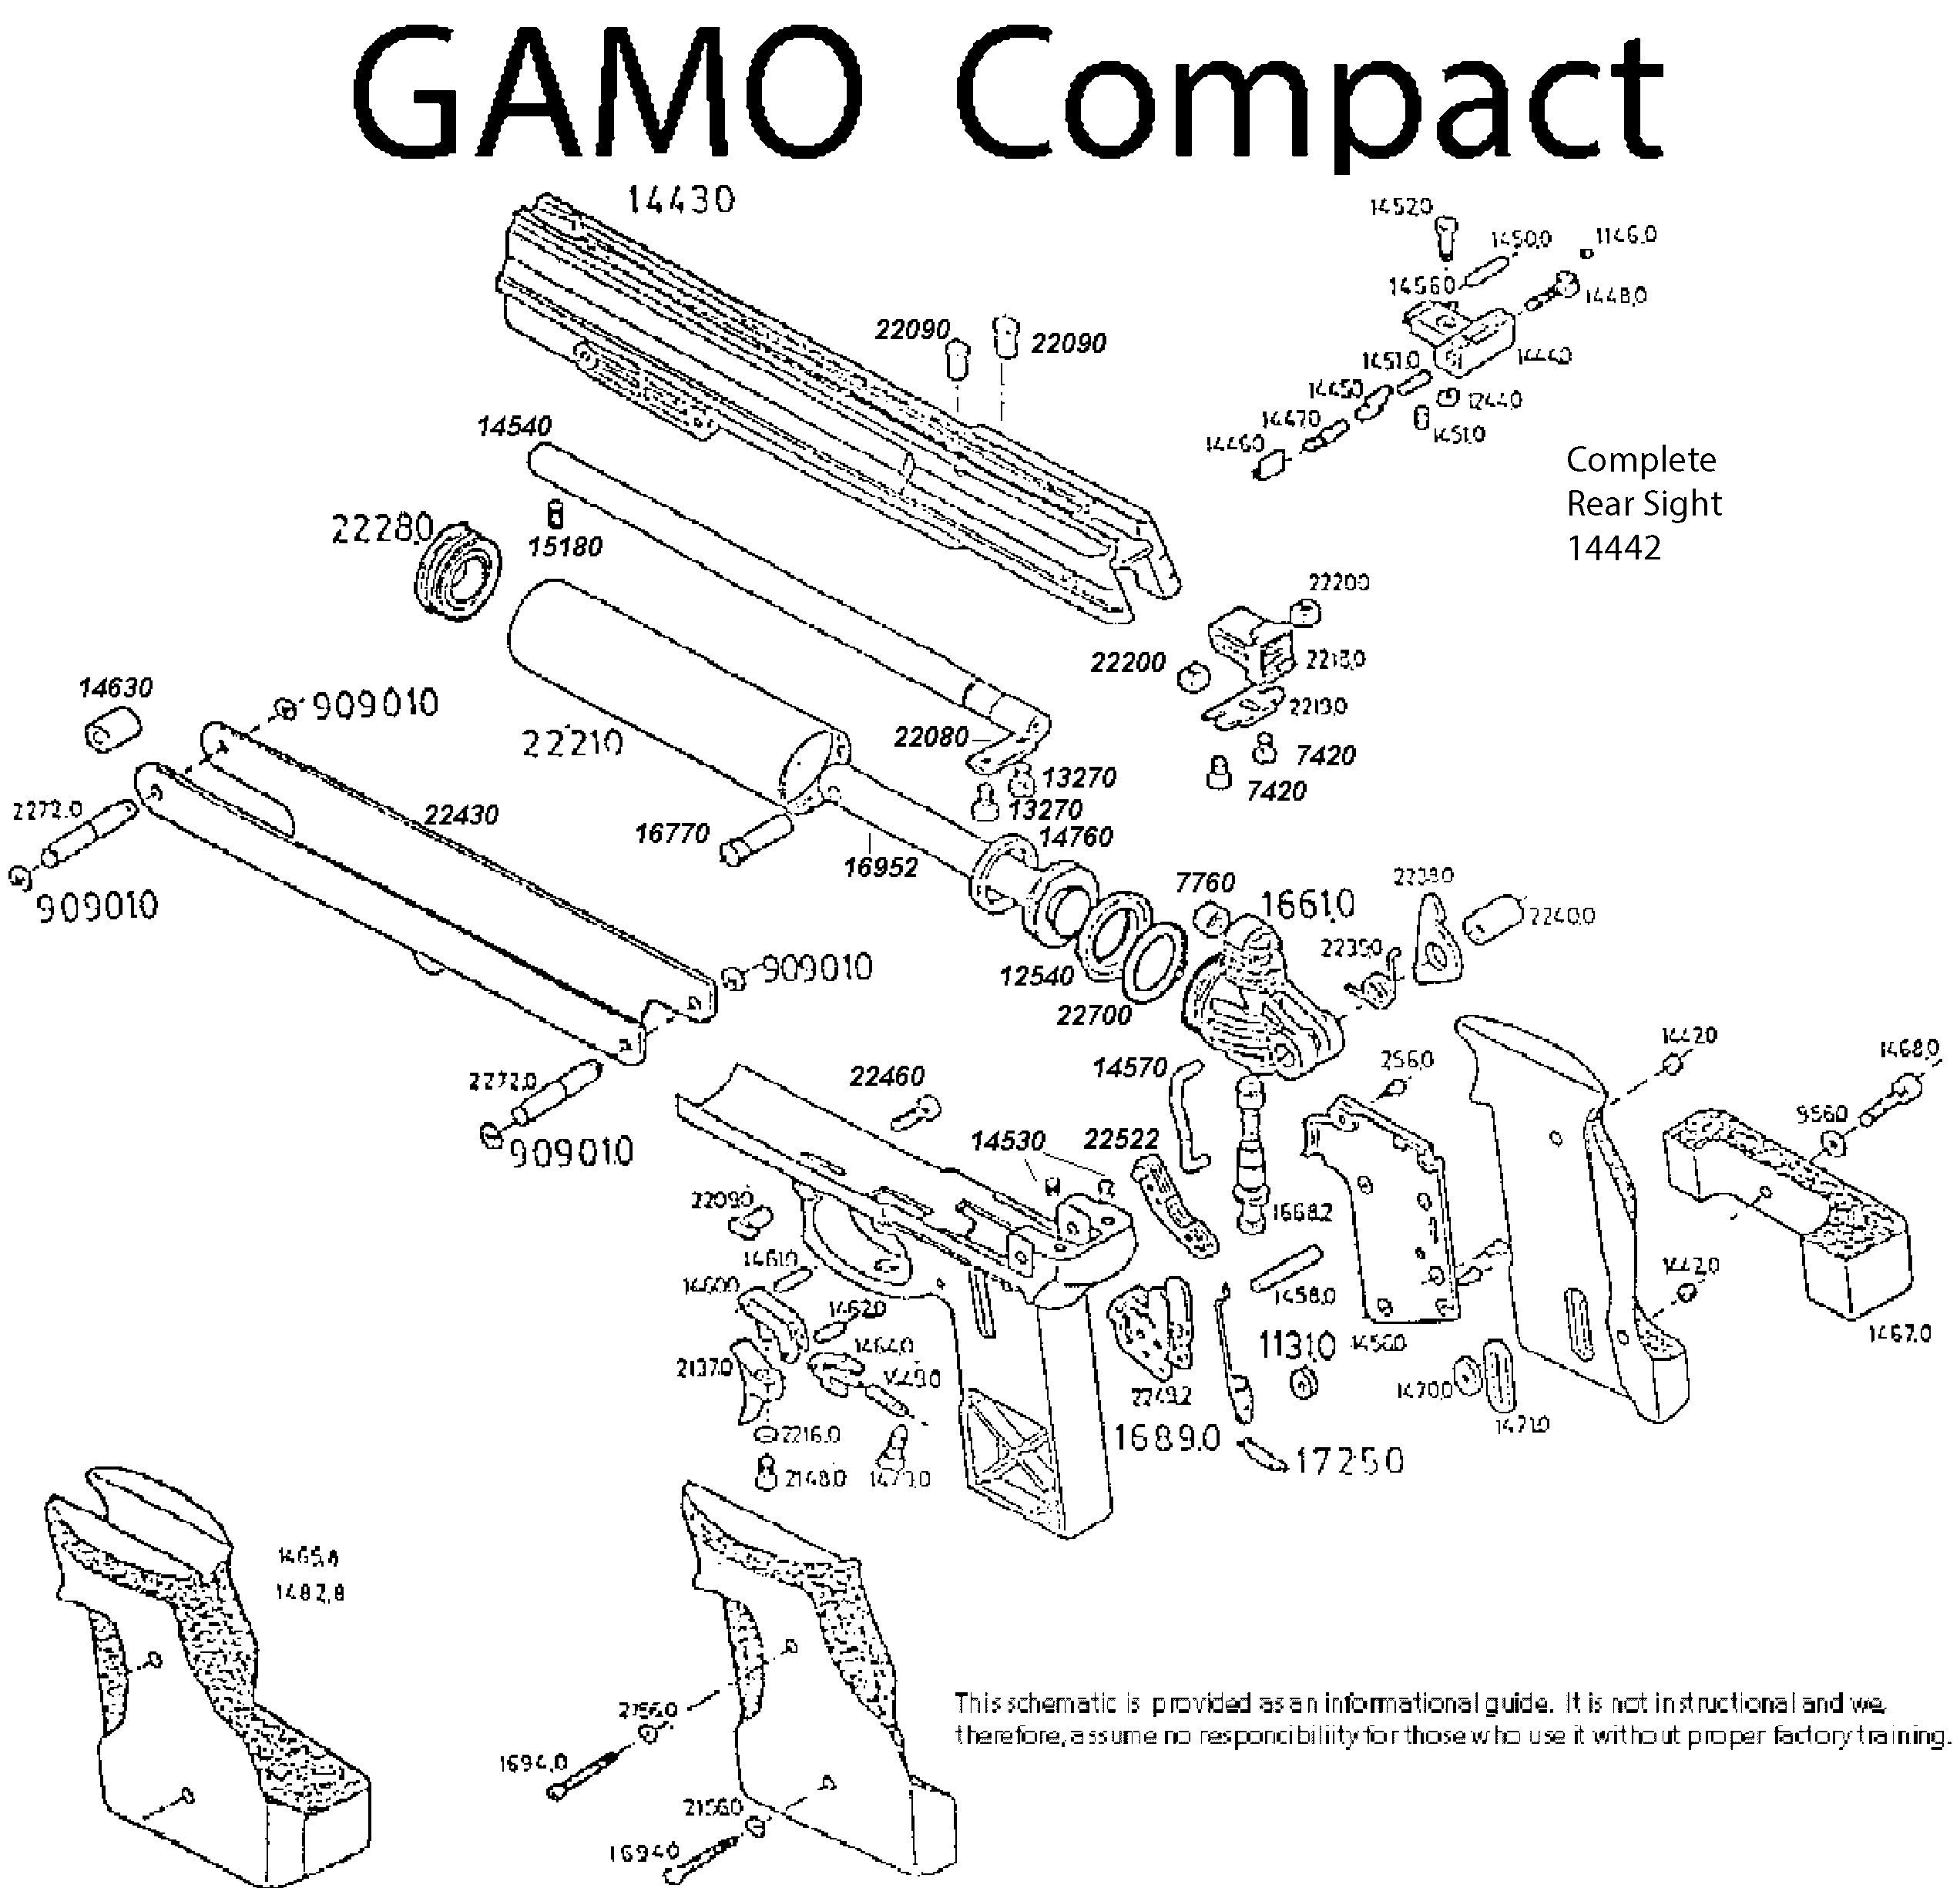 Compact Schematic